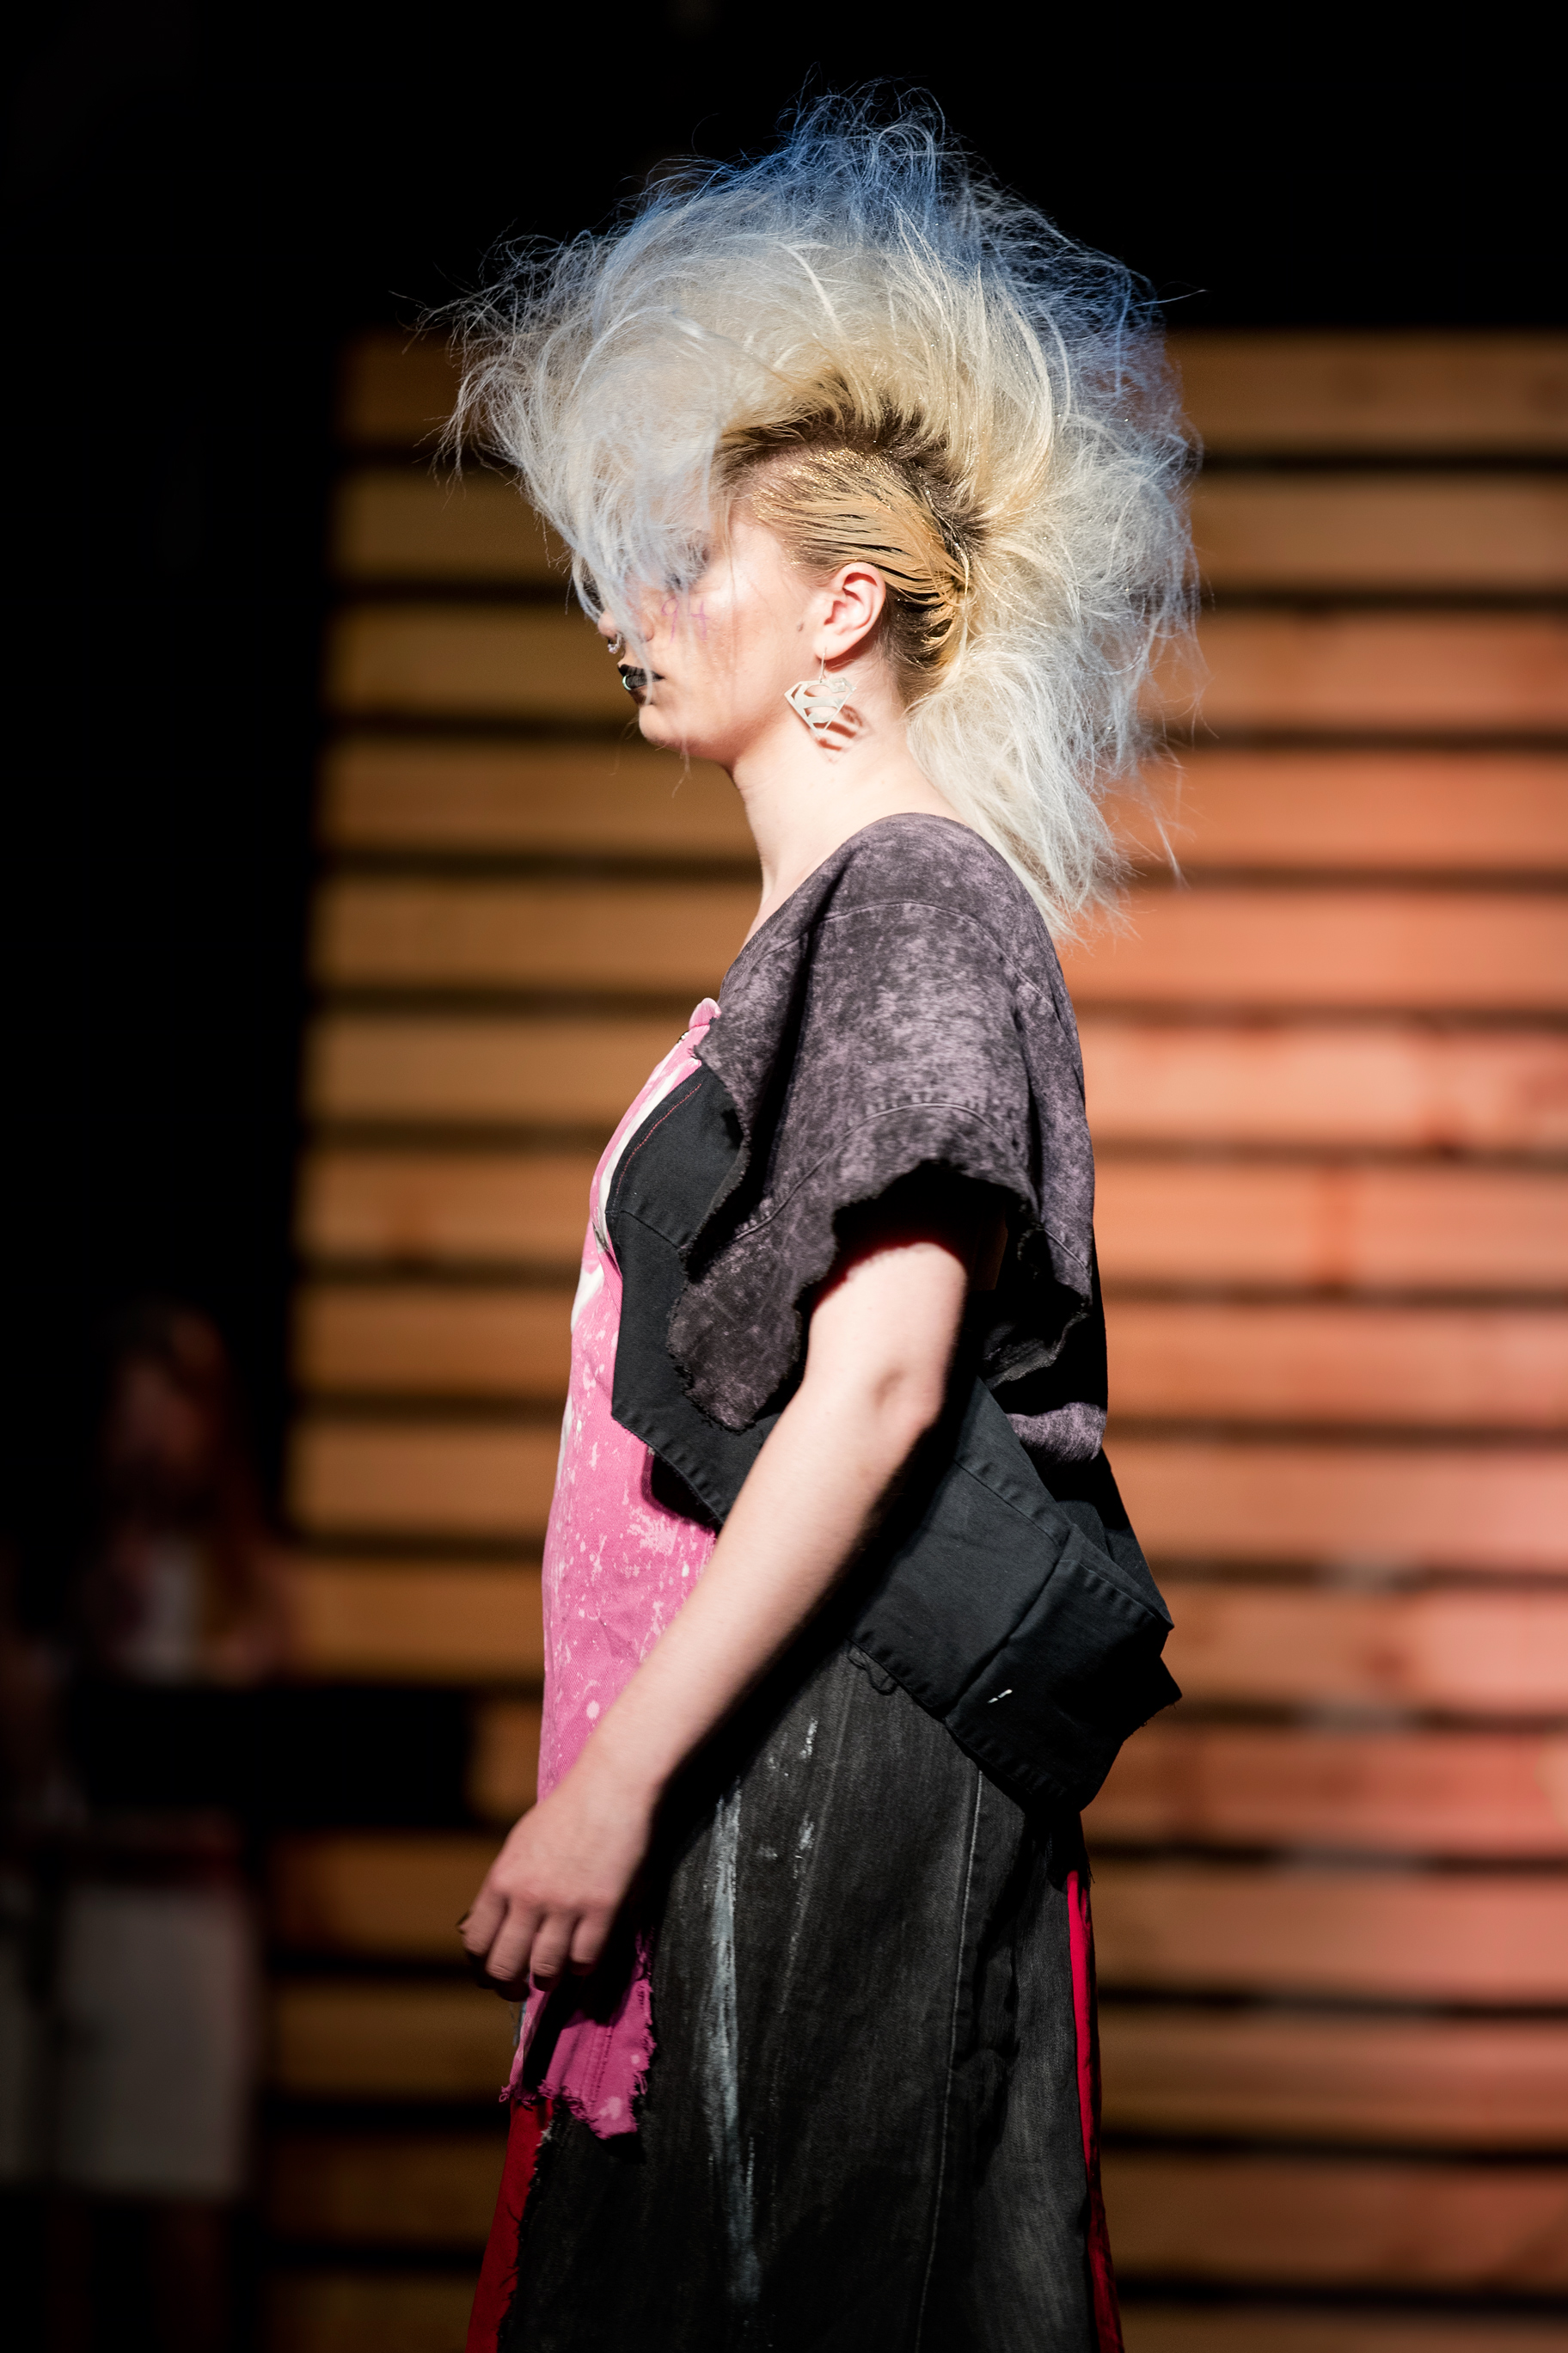 Mission Wear Upcycled Patchwork Fashion Show - 079.jpg